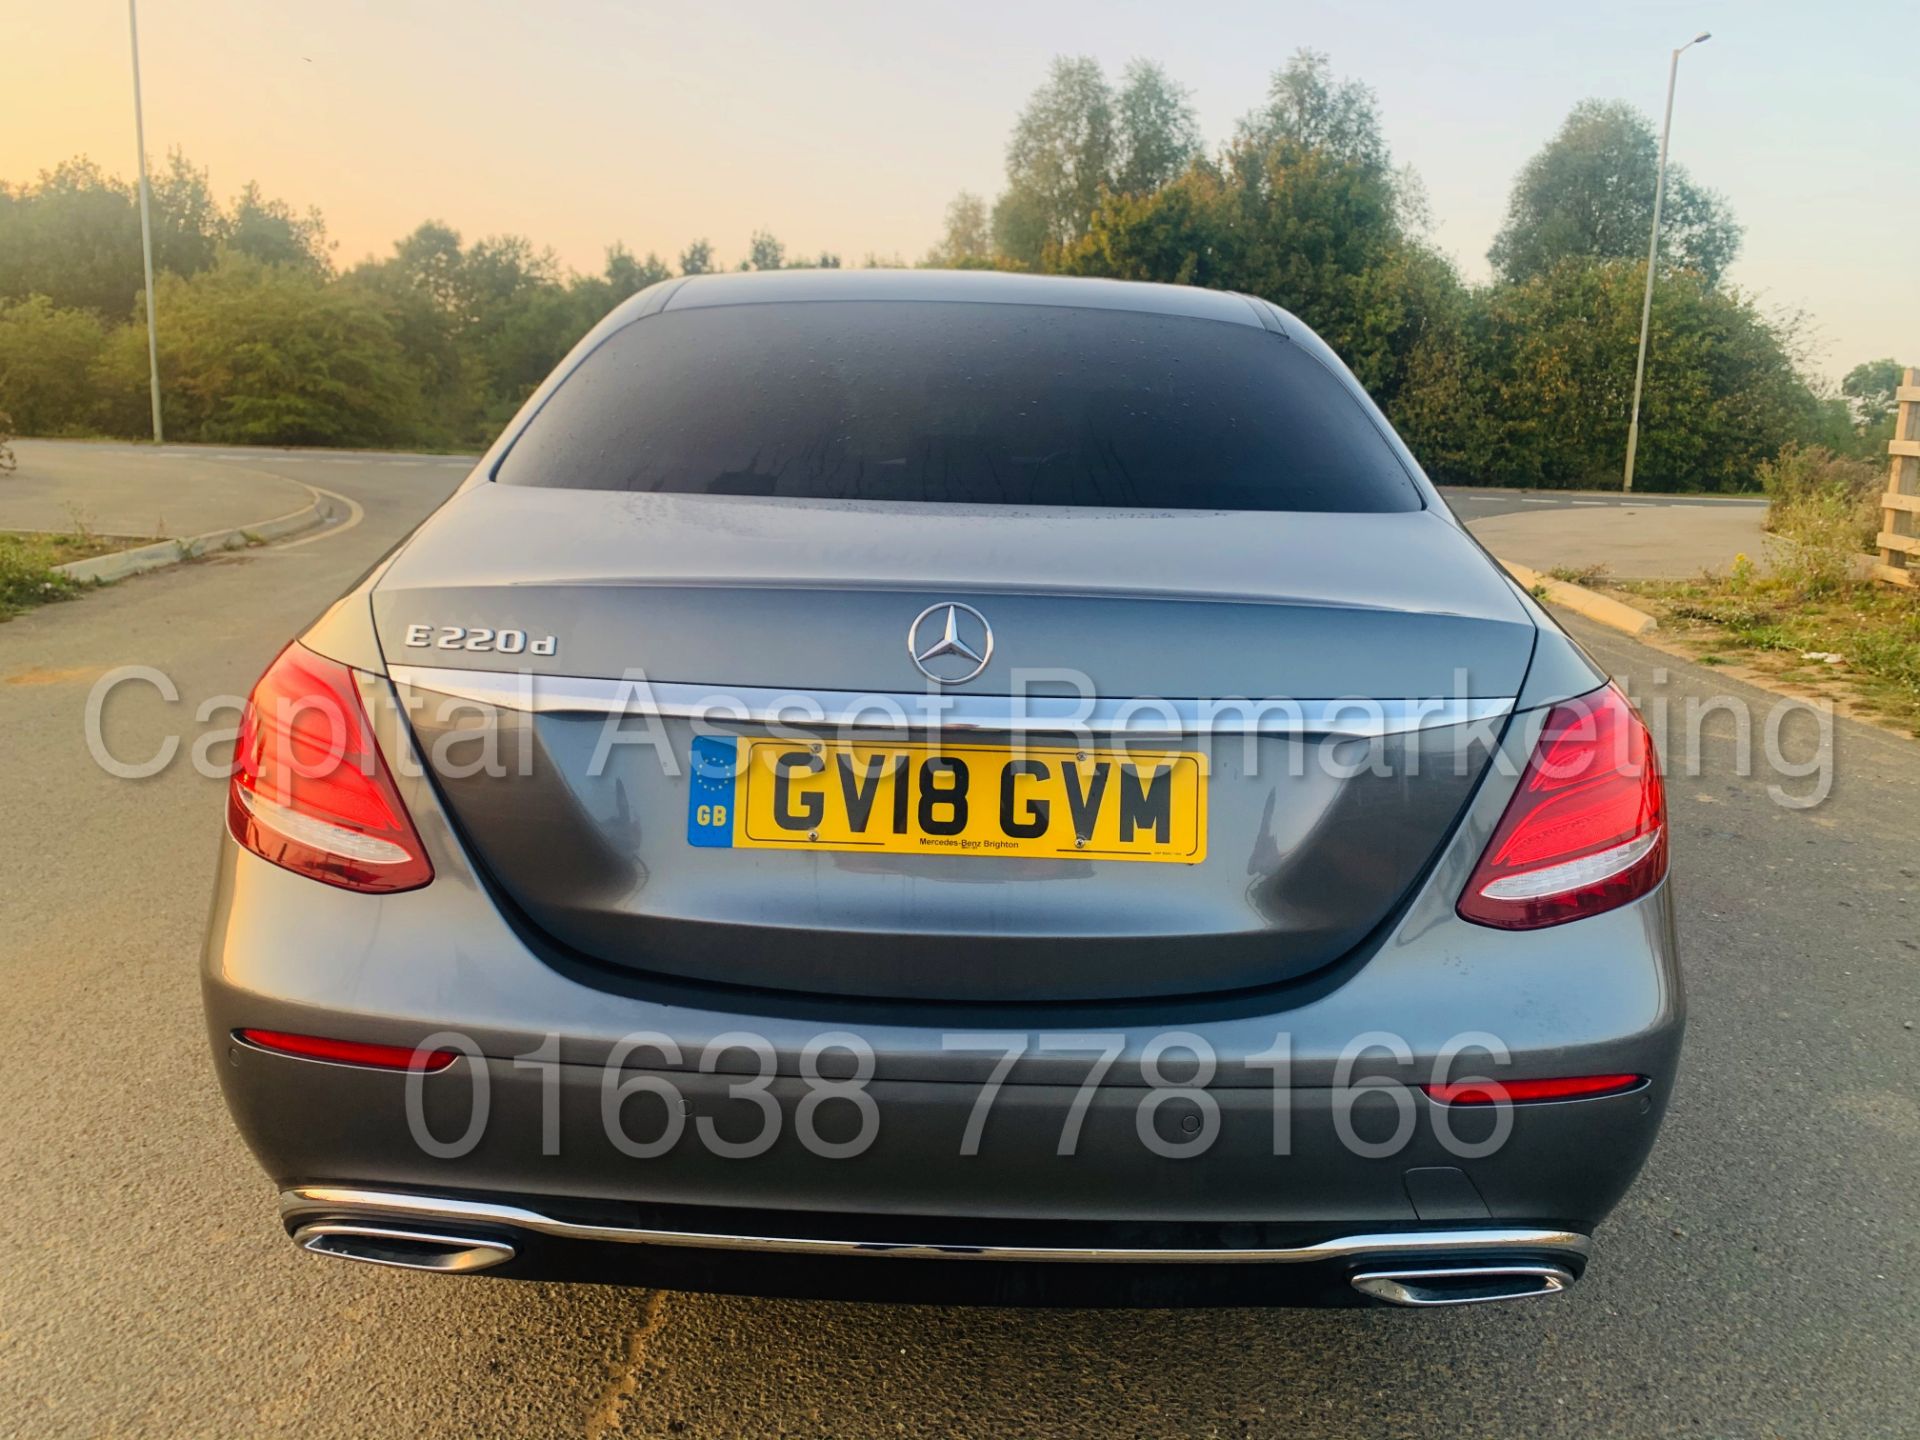 (On Sale) MERCEDES-BENZ E220D *SALOON* (2018 - NEW MODEL) '9-G TRONIC AUTO - LEATHER - SAT NAV' - Image 7 of 53